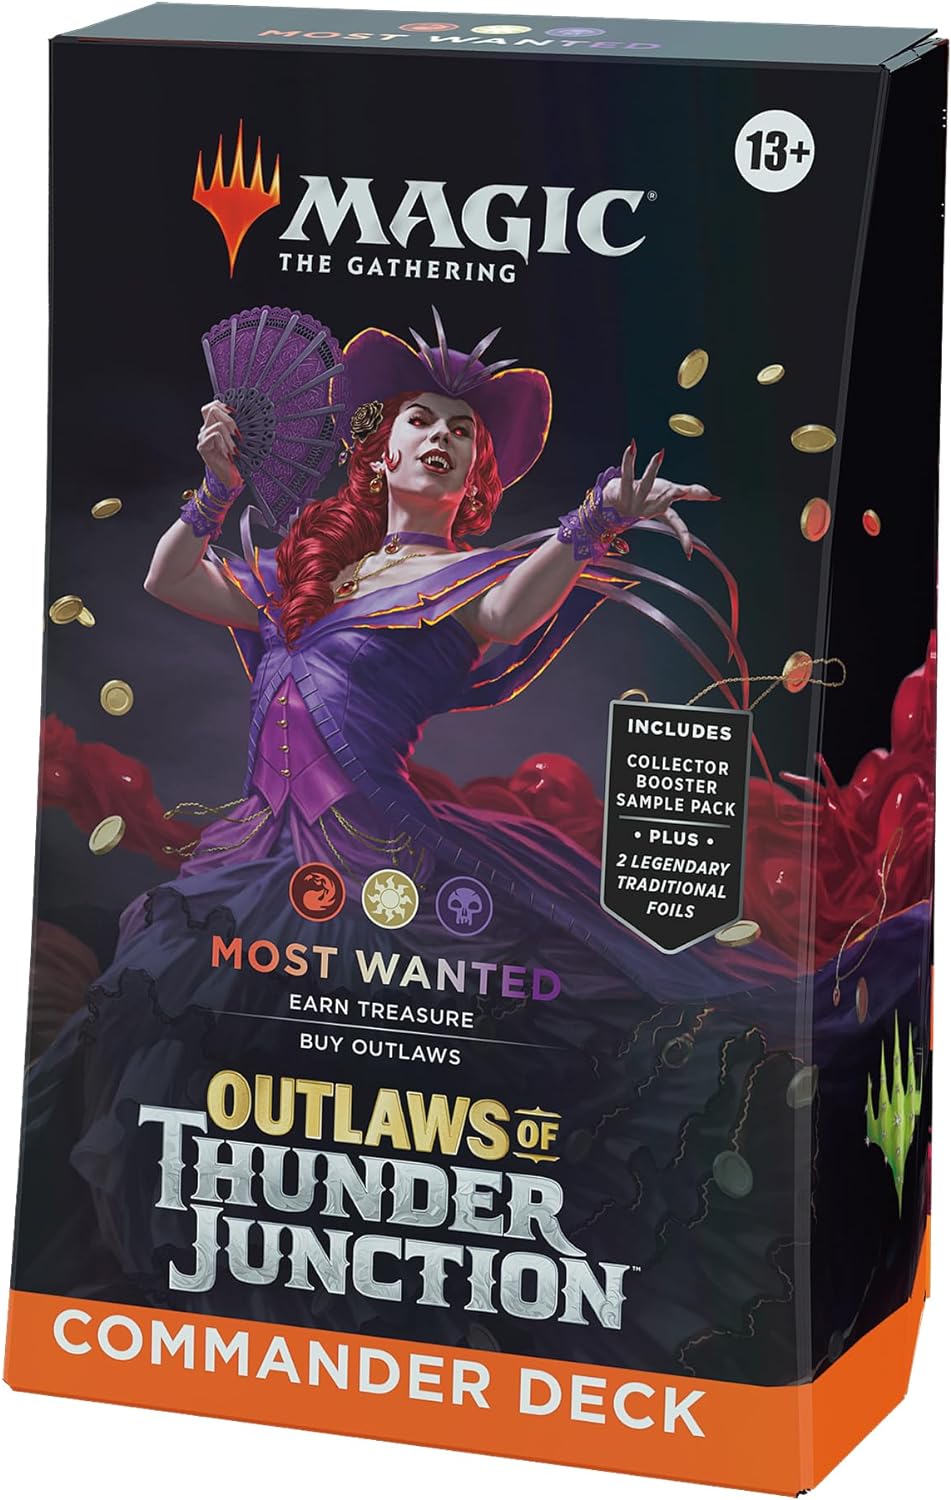 Magic: The Gathering Outlaws of Thunder Junction Commander Deck - Most Wanted (100-Card Deck, 2-Card Collector Booster Sample Pack + Accessories), Trading Cards made by Magic The Gathering. Exit 23 Games 